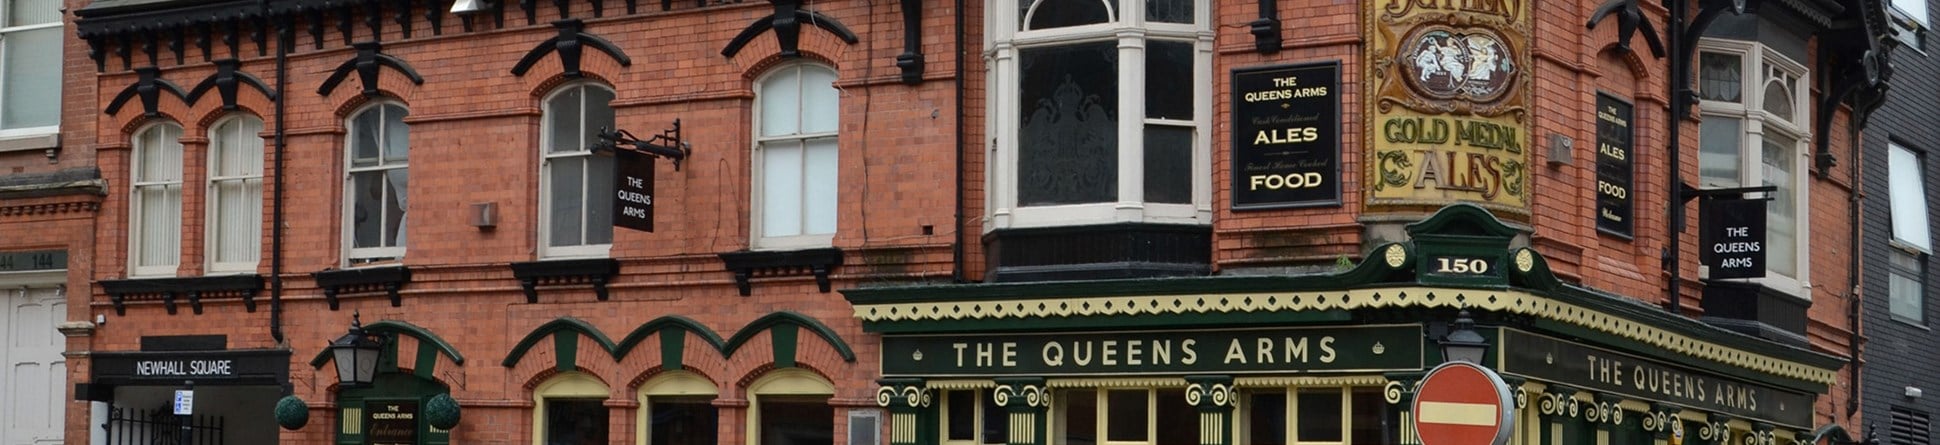 A photo from street level of a pub in Birmingham with green frontage and bay windows on the ground floor